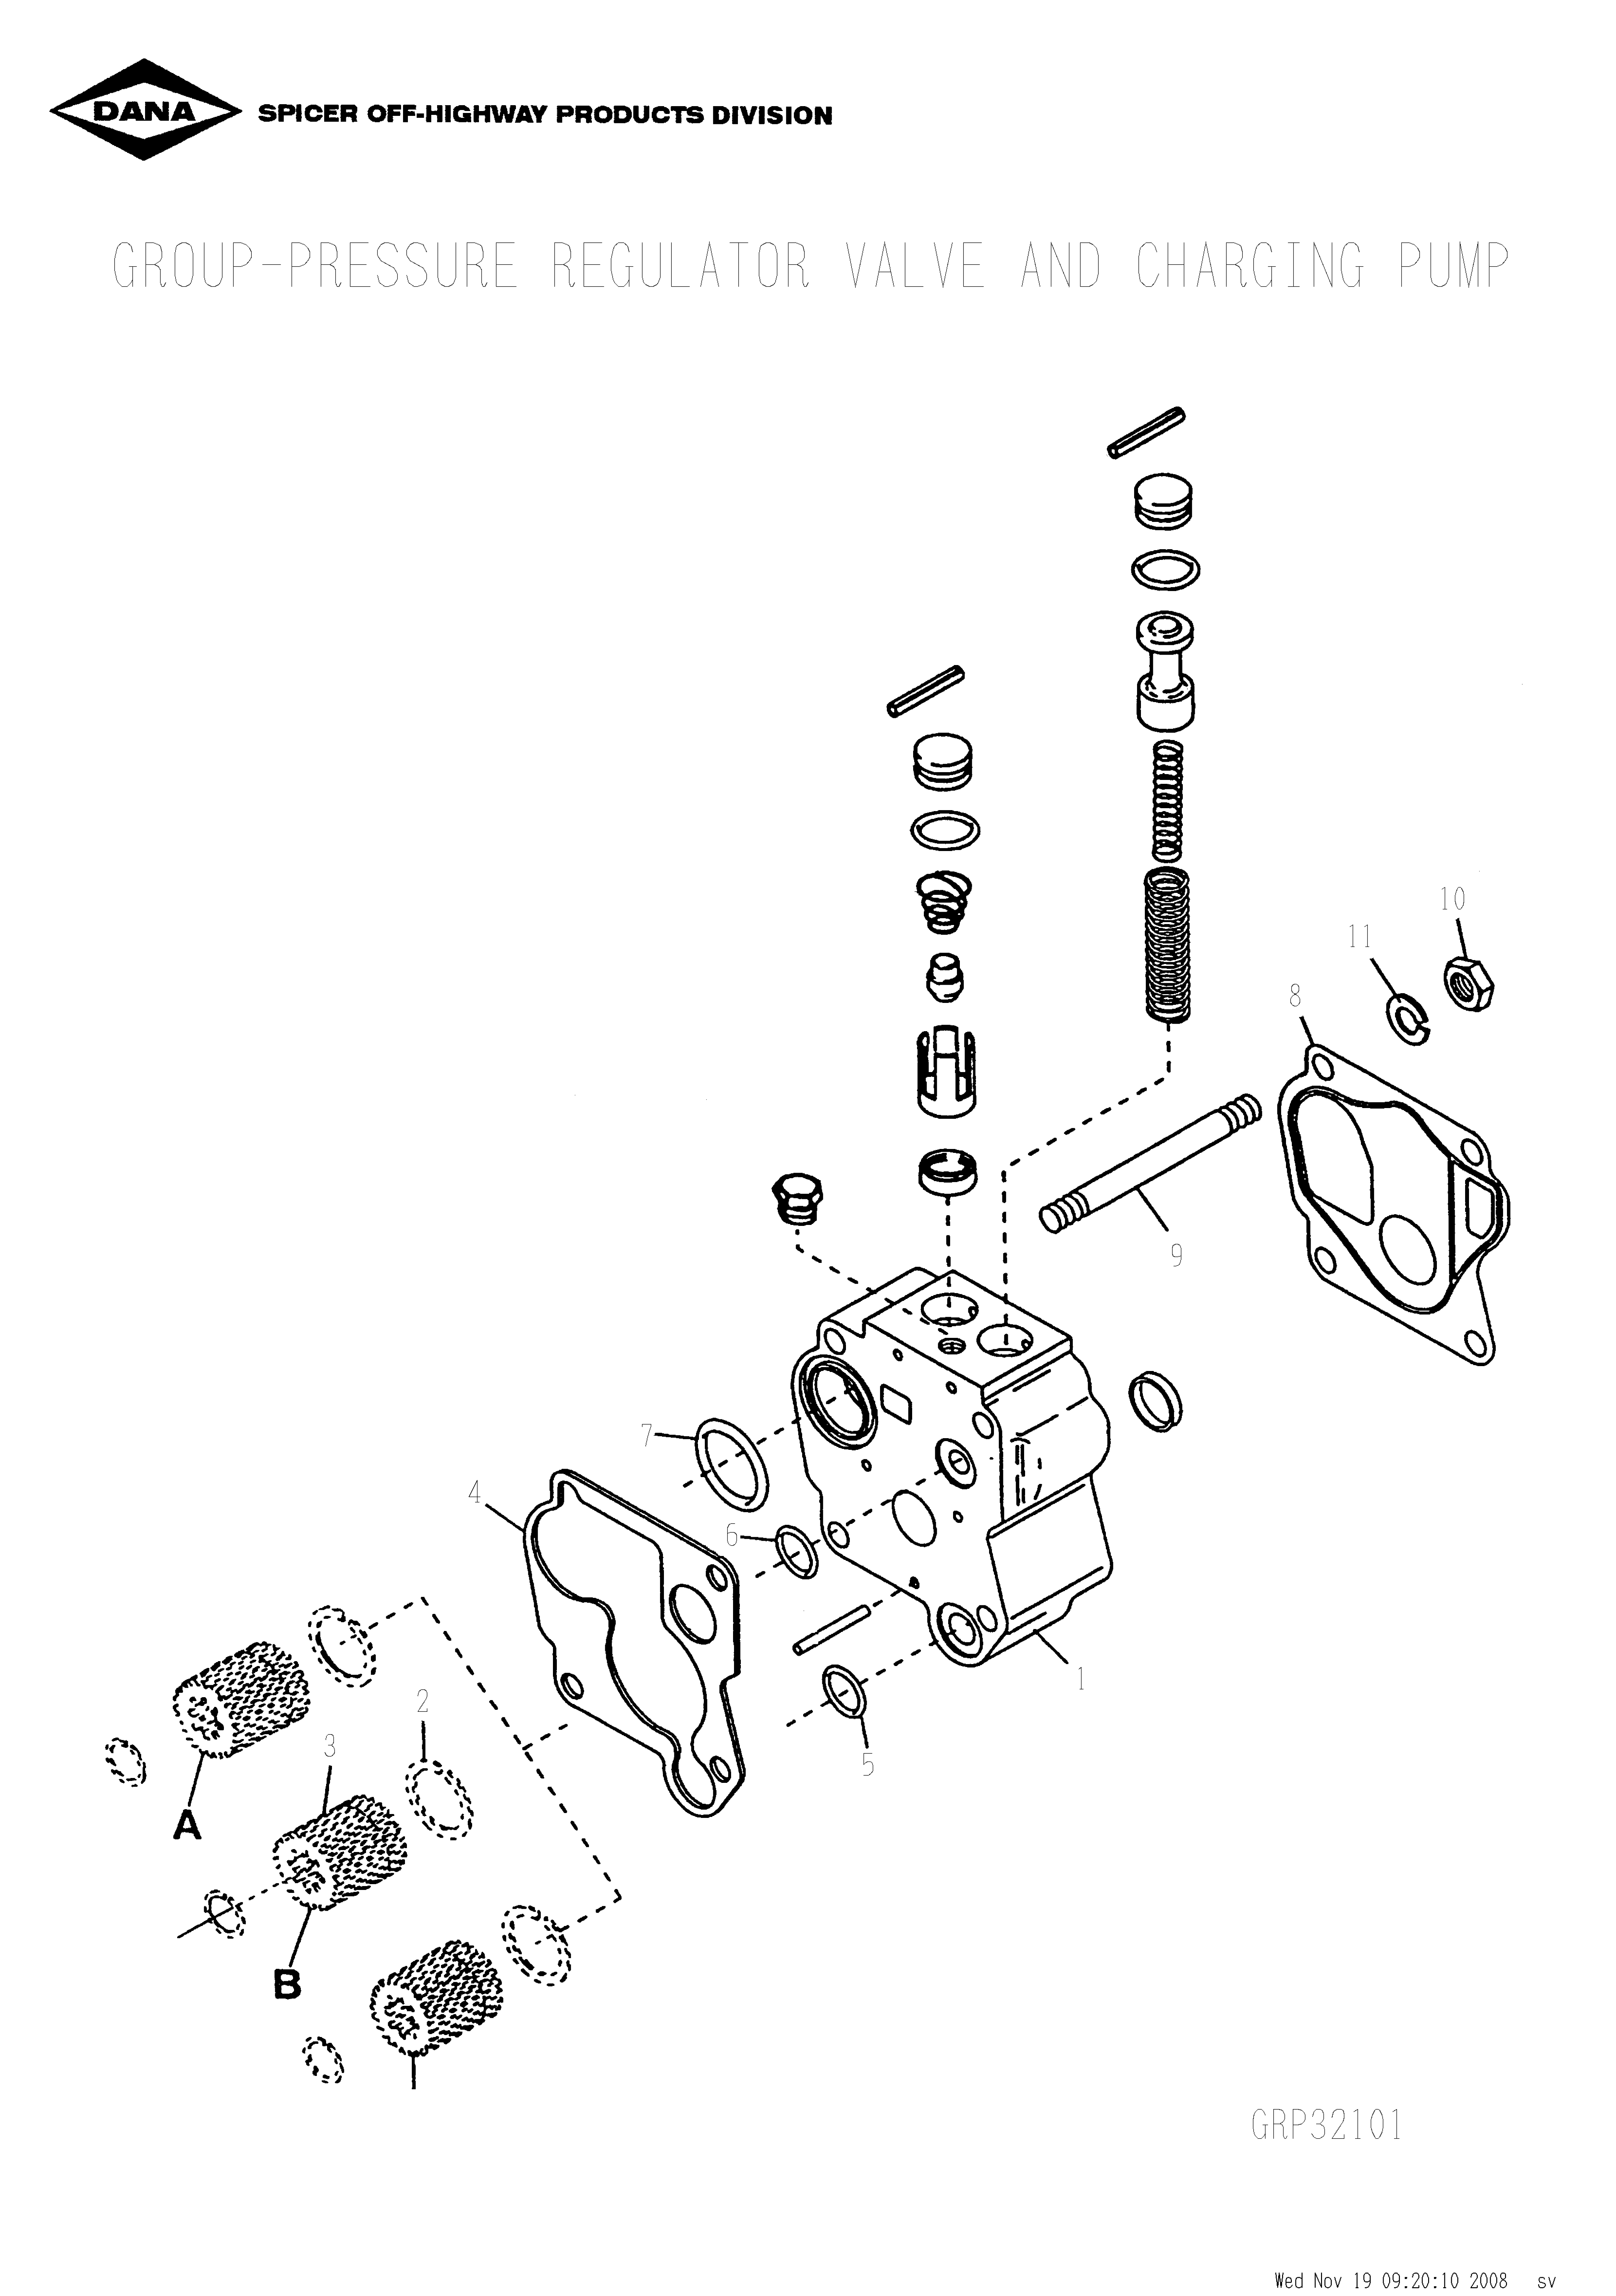 drawing for OLDENBURG LAKESHORE UV401734 - ASSY-CHARGE PUMP & COVER (33000-28 GPM AT 2000 RPM)